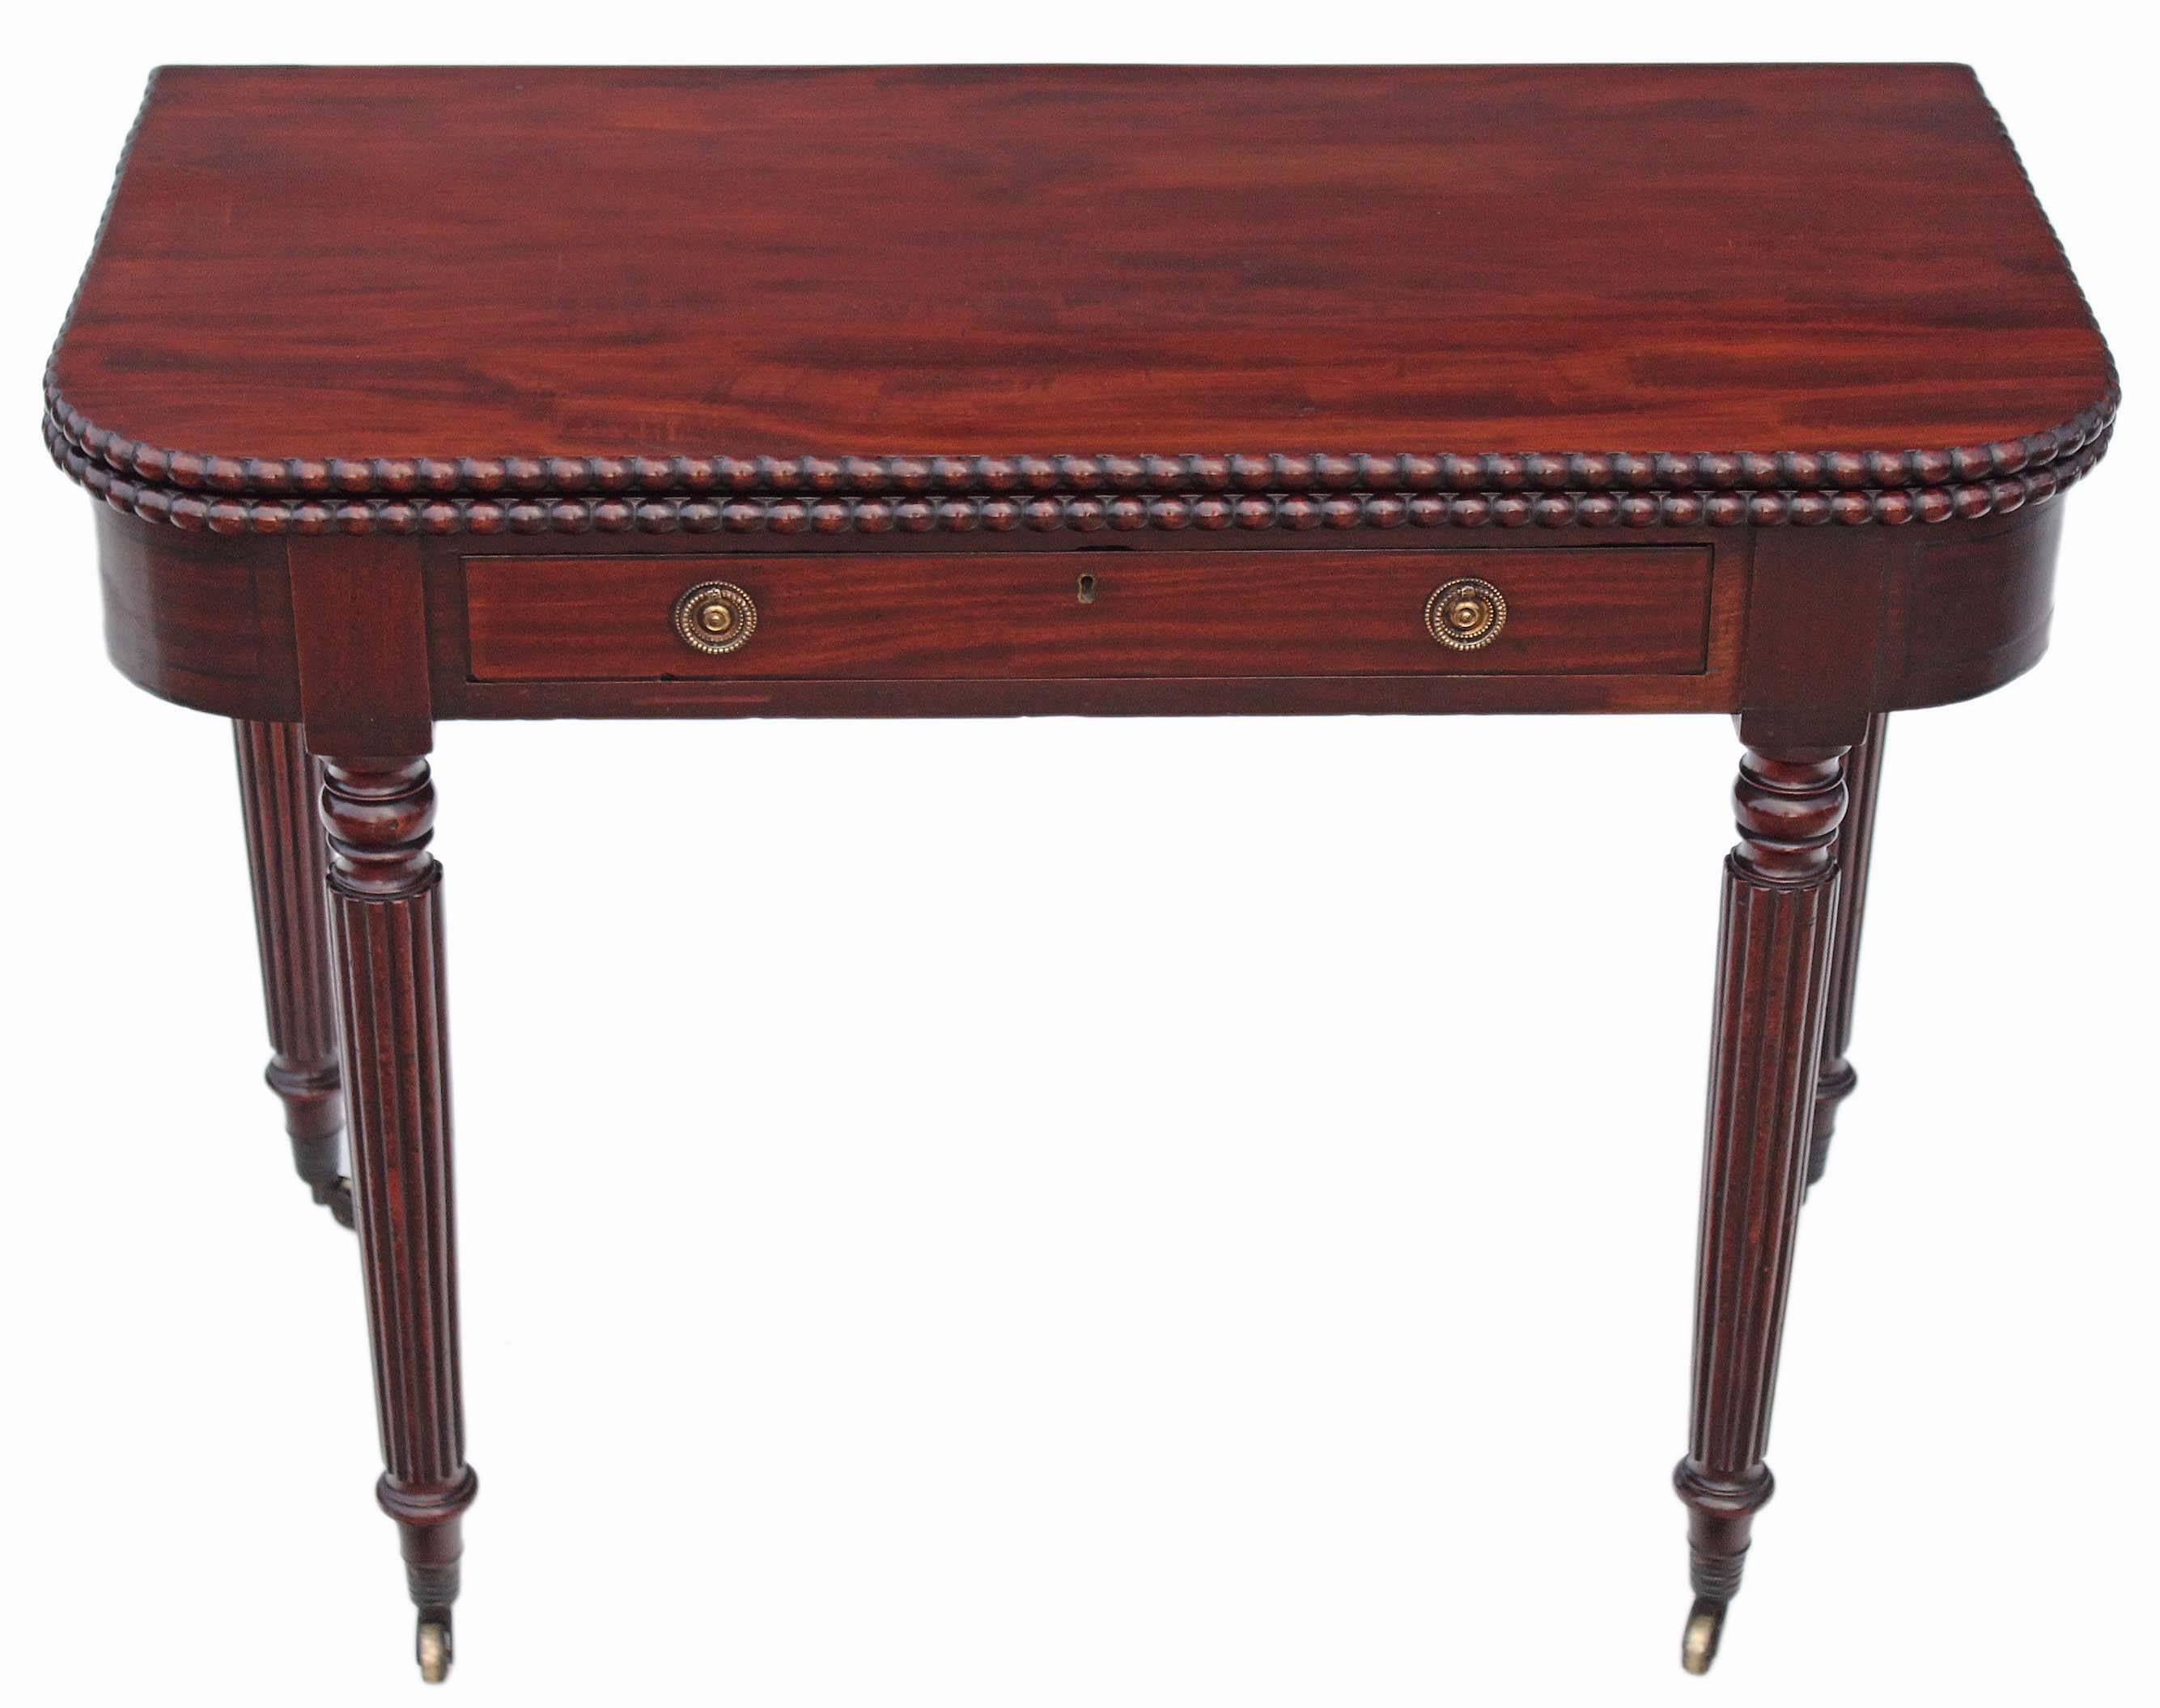 Antique quality Victorian mahogany 19th century folding tea table.

This piece has an oak lined drawer (slides freely), which is quite a rare feature for a tea table.

This is a lovely table, that is full of age, charm and character, with large